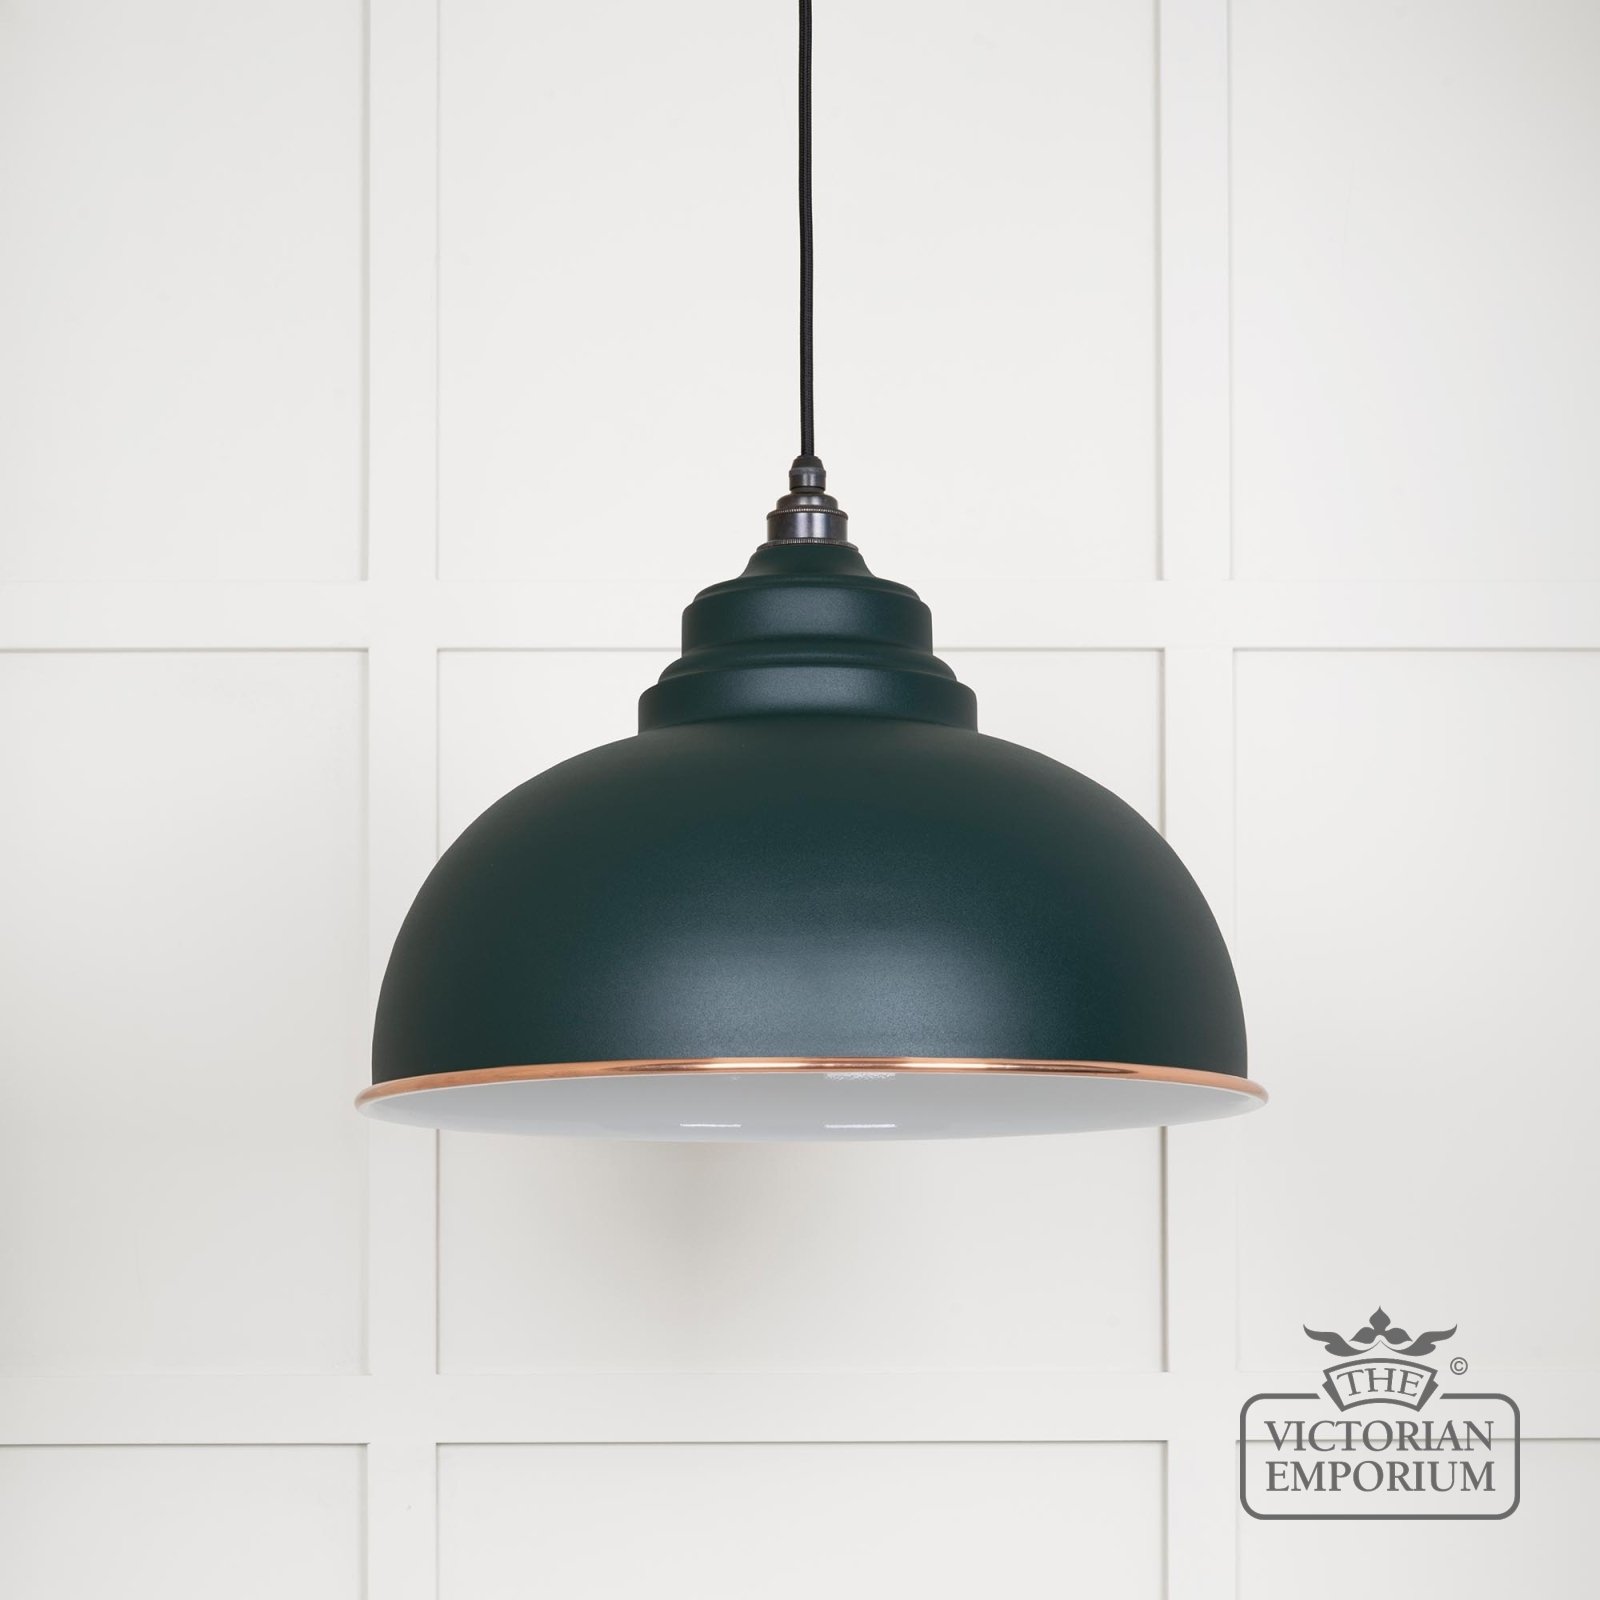 Harlow pendant light in Dingle with white gloss interior